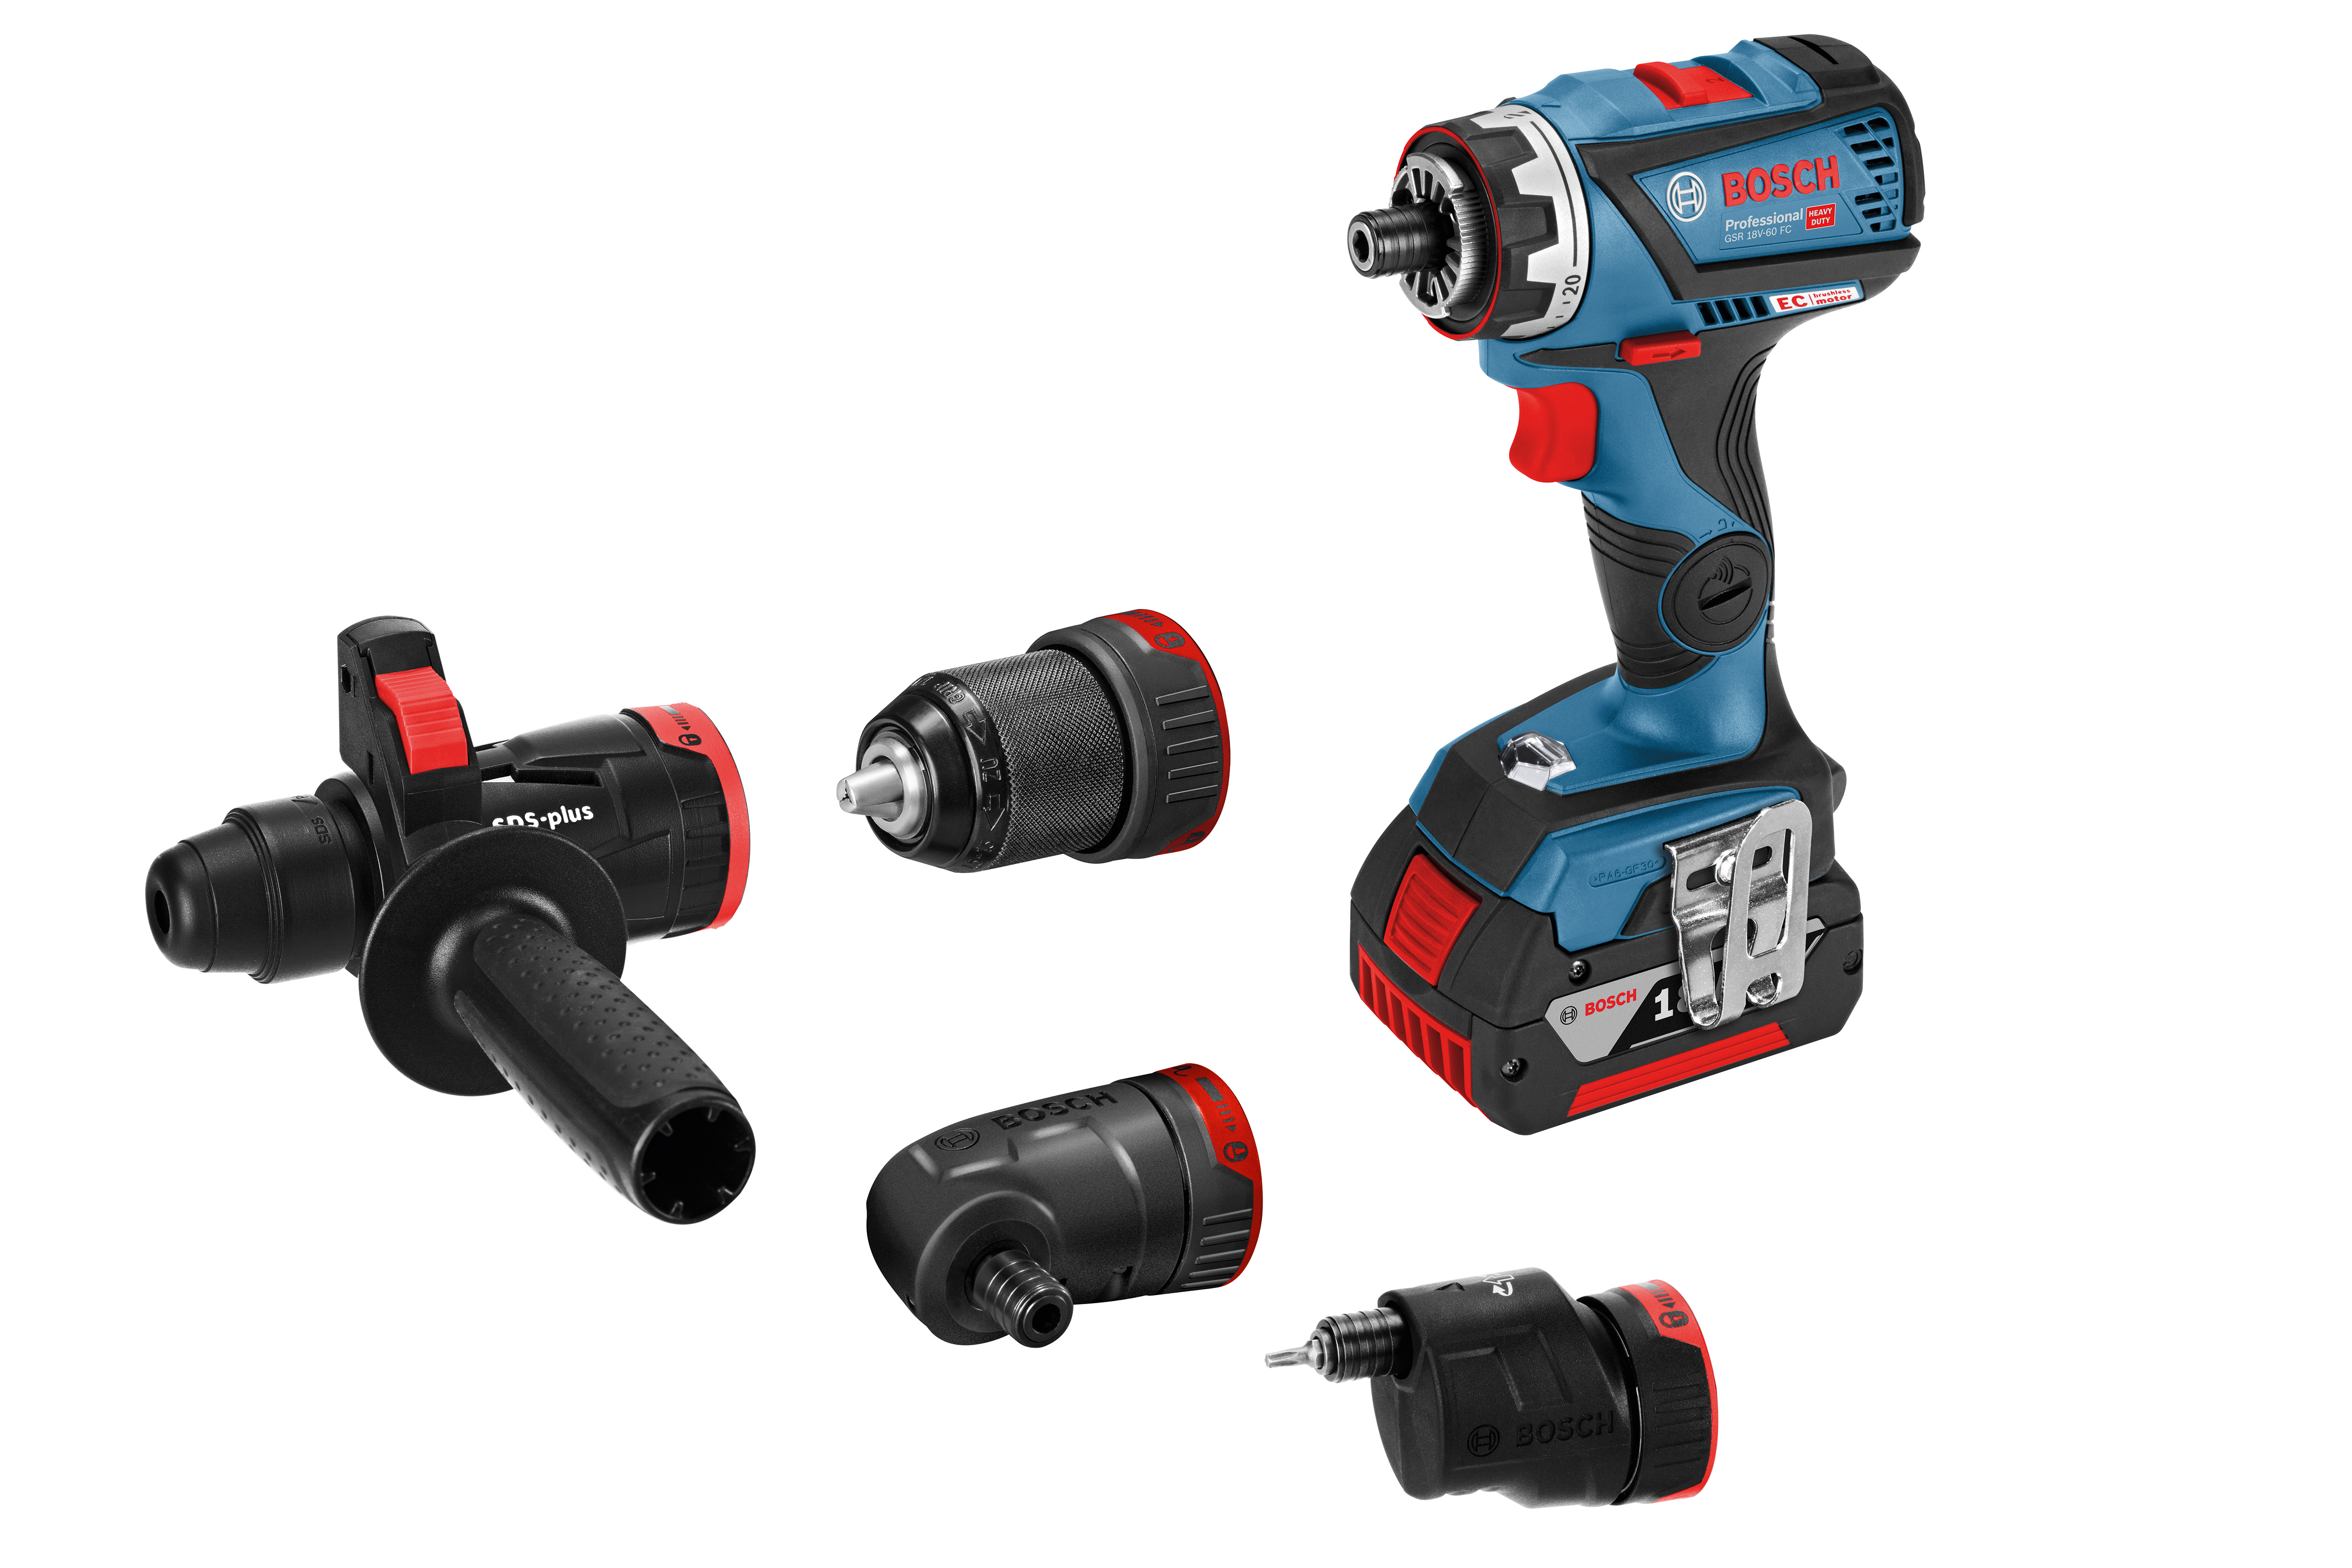 More versatile than ever: the new Bosch FlexiClick screwdriver for professionals